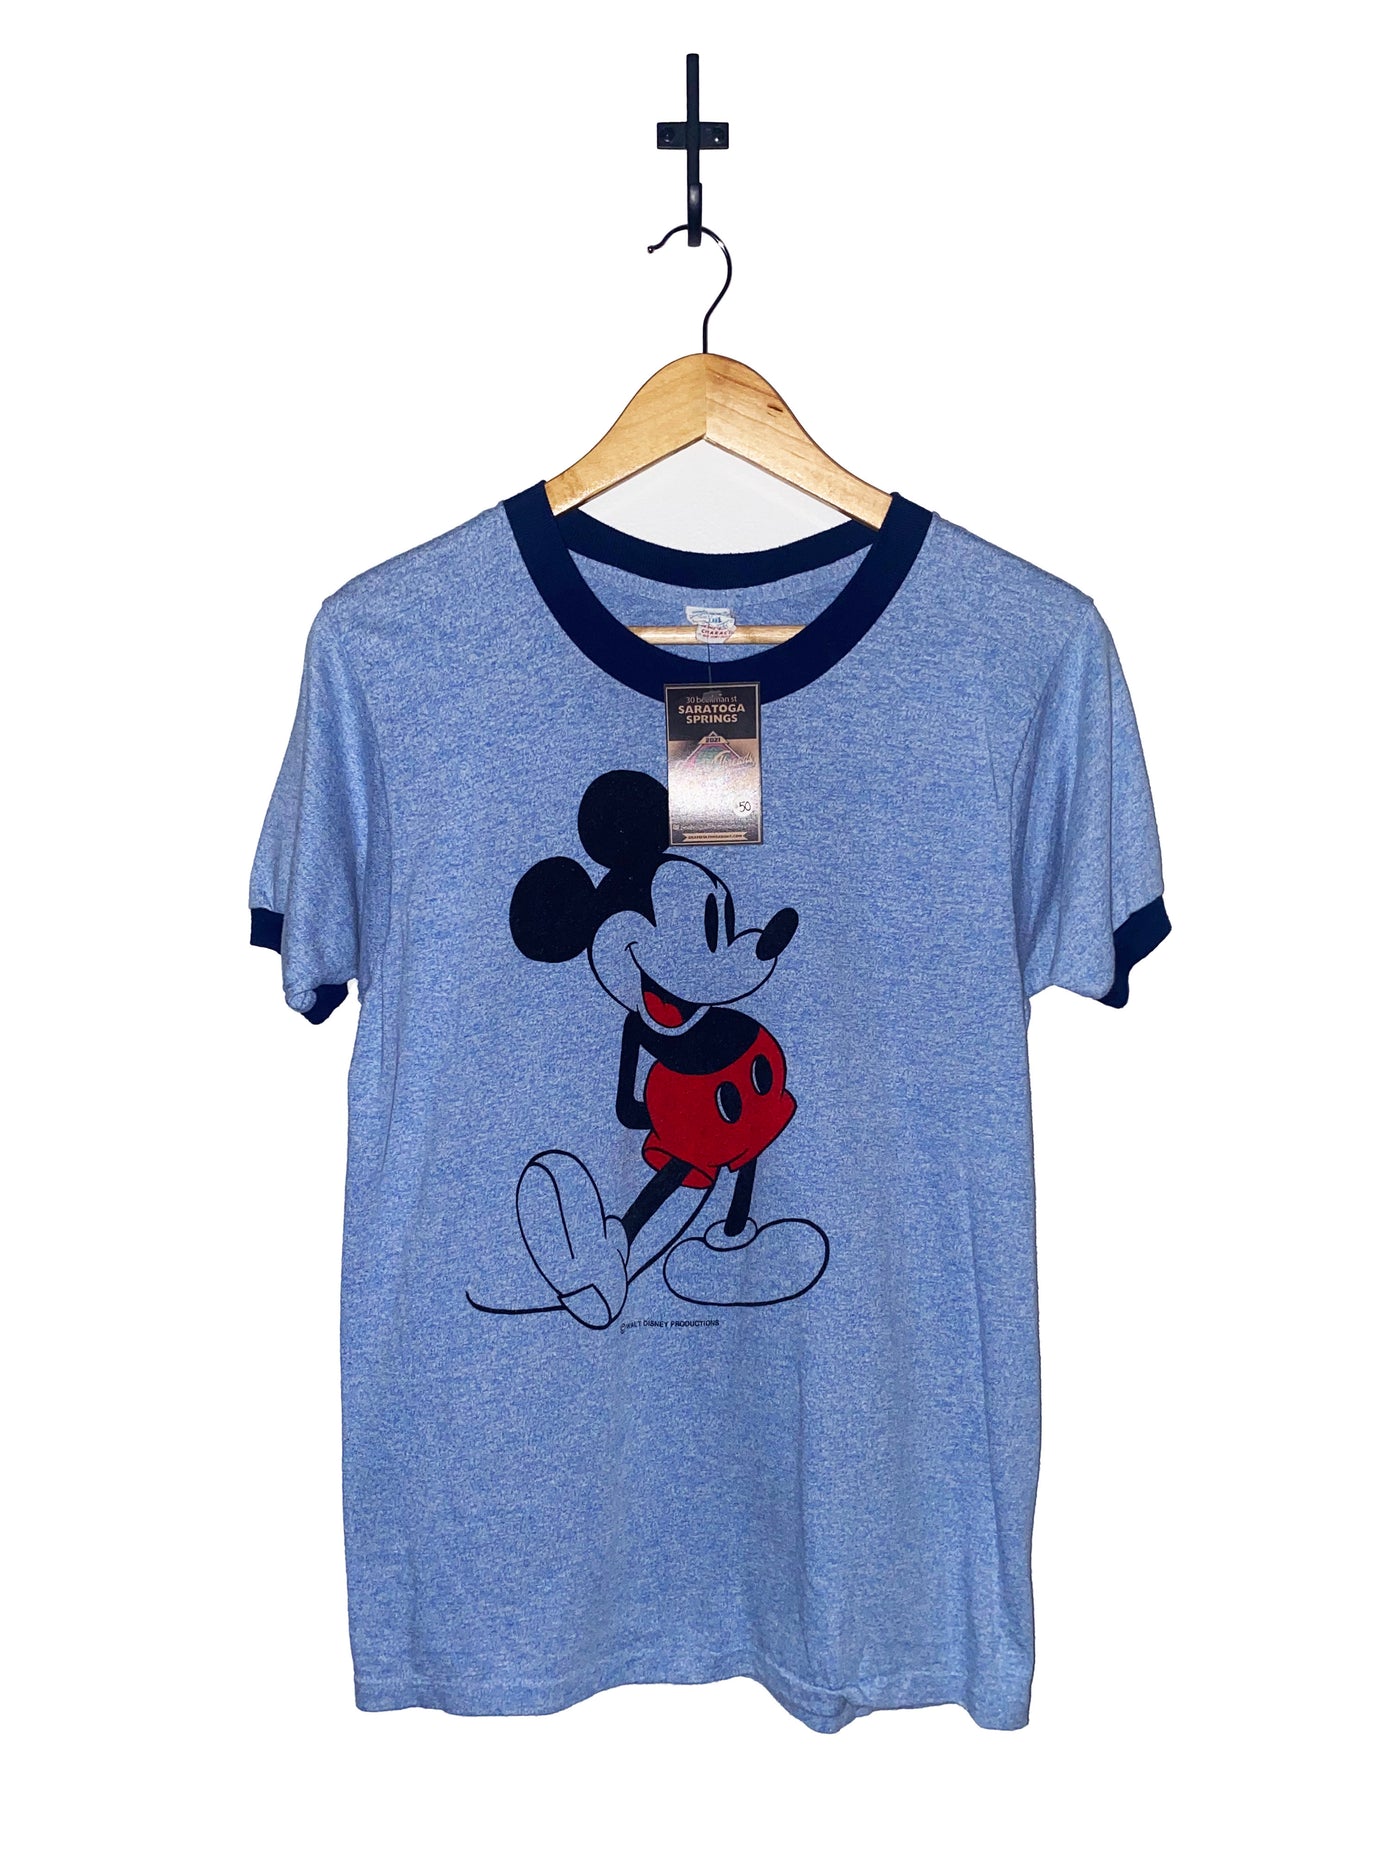 Vintage 70’s Mickey Mouse T-Shirt